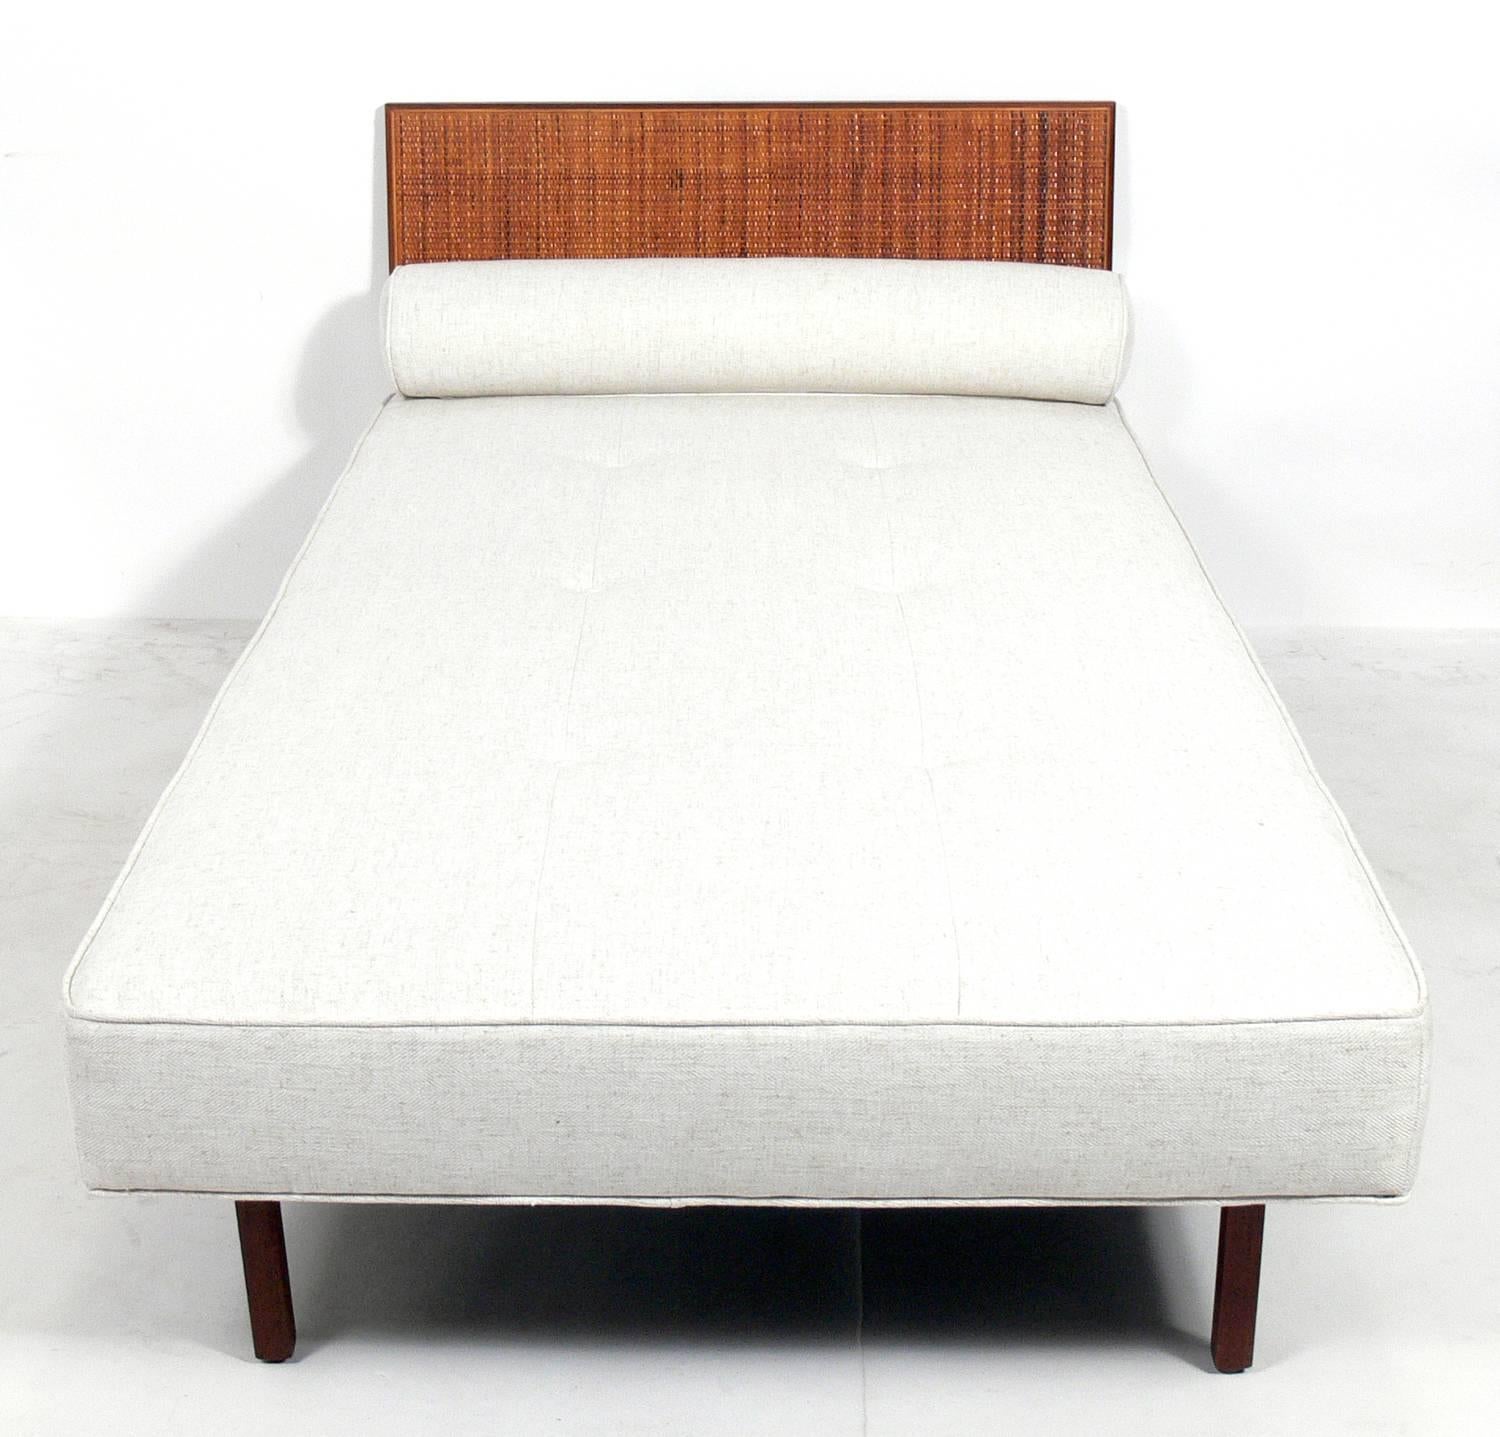 Clean Lined Daybed, designed by Florence Knoll for Knoll, American, circa 1950s. It has been reupholstered in an ivory color herringbone fabric.